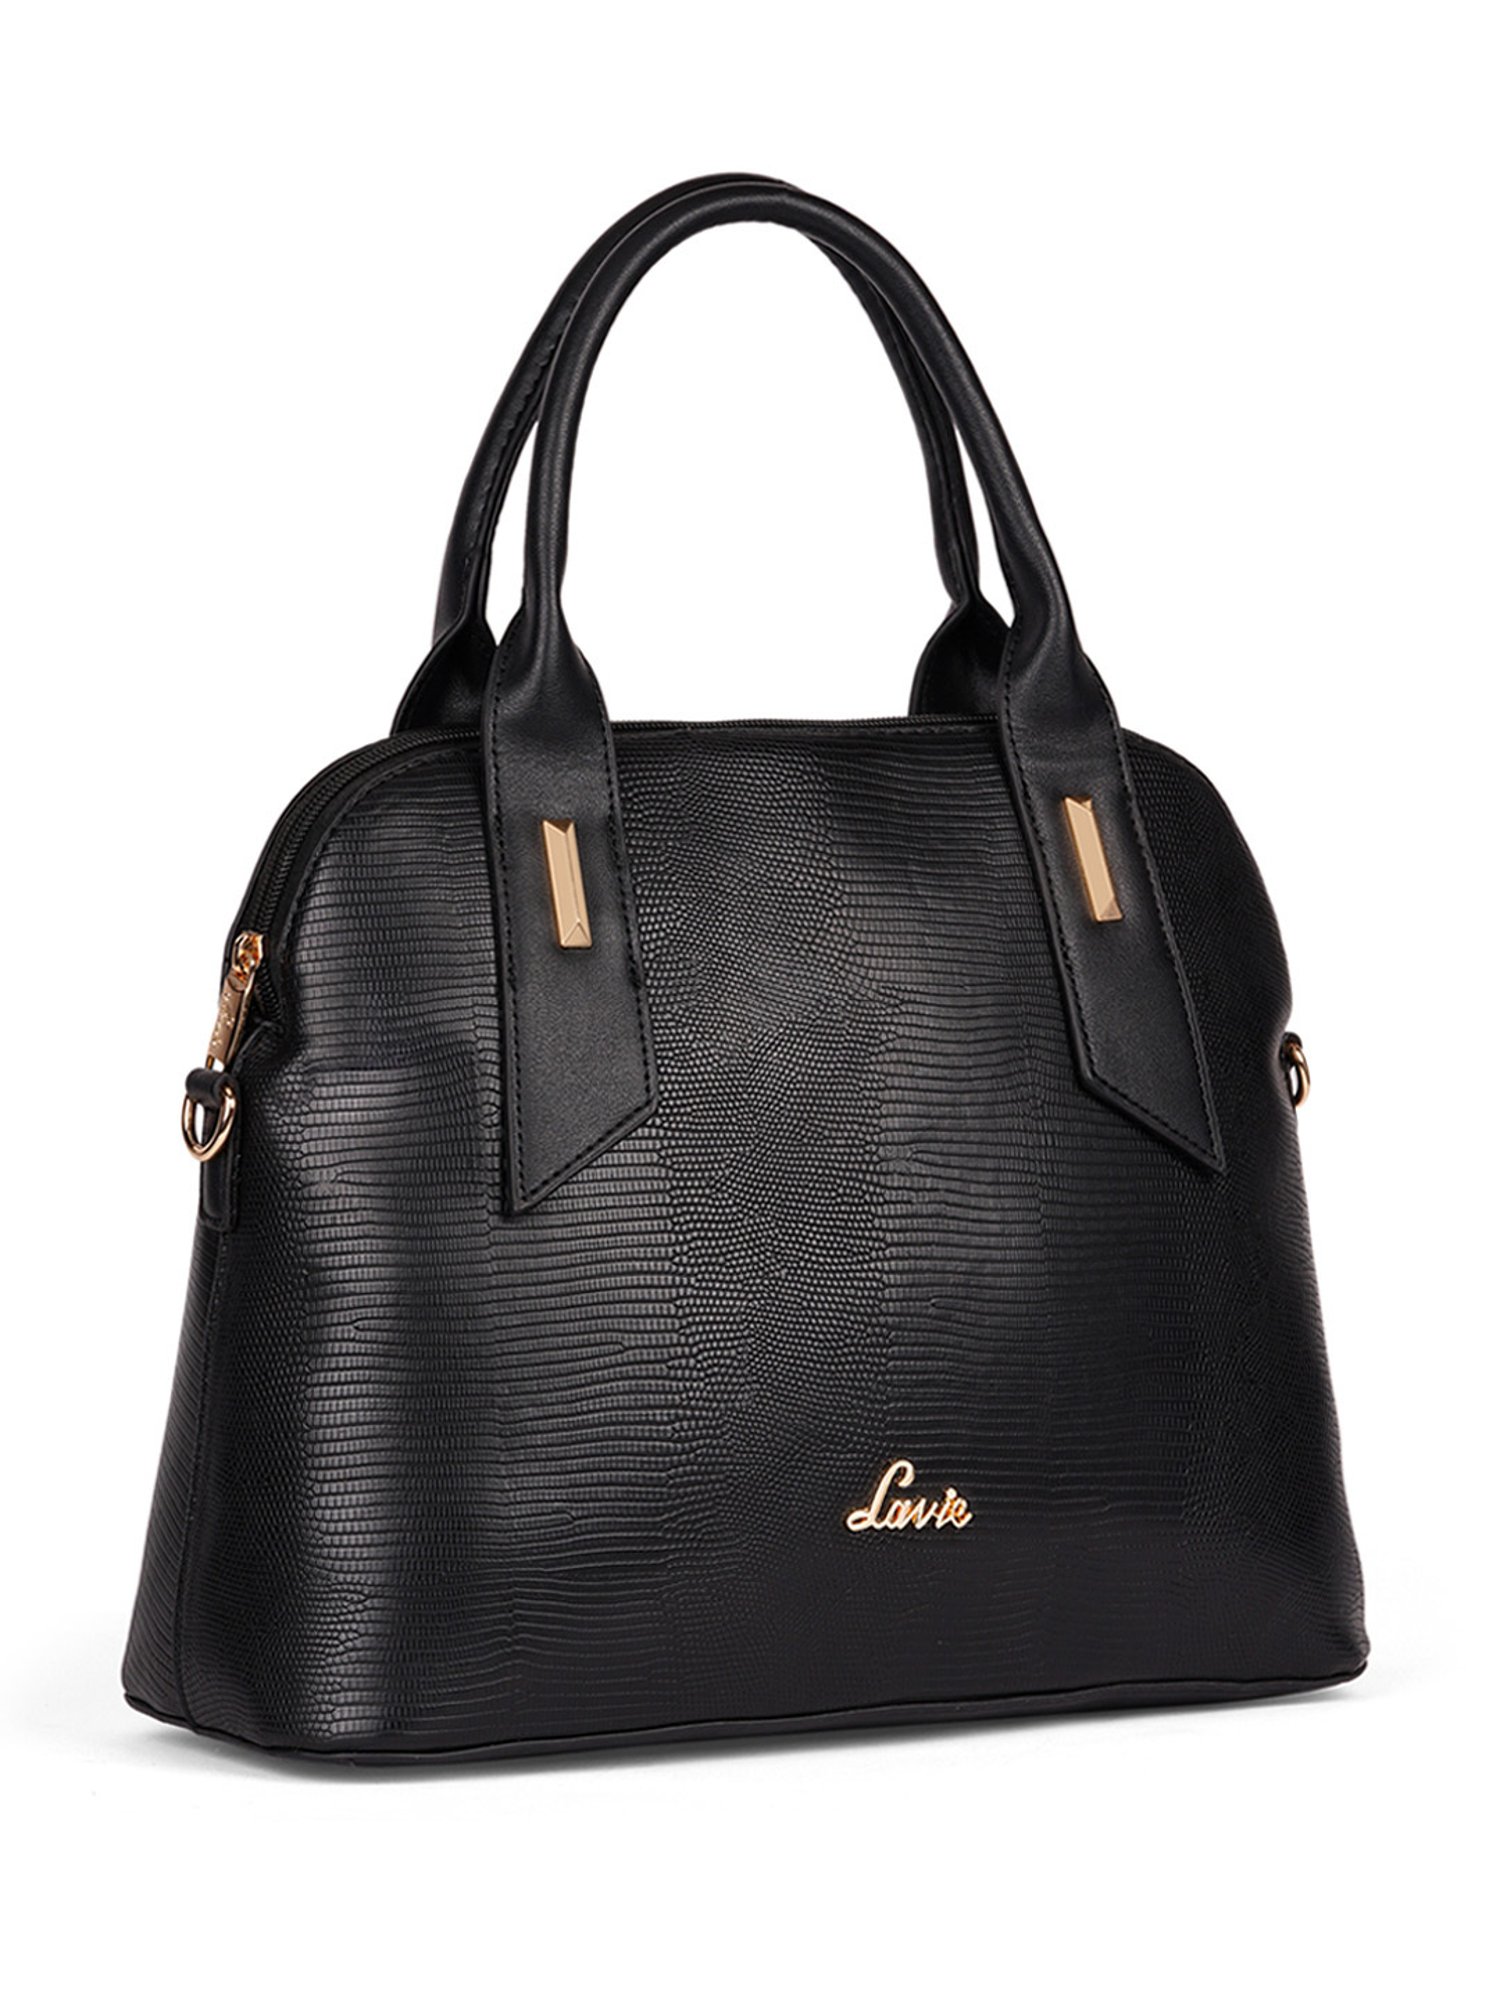 Luxury Genuine Leather Evening Tote Bag With Khaki Cross Body Bag Straps  For Women By Designers Lavie Collection From Dhxingfashionbagss, $56.41 |  DHgate.Com